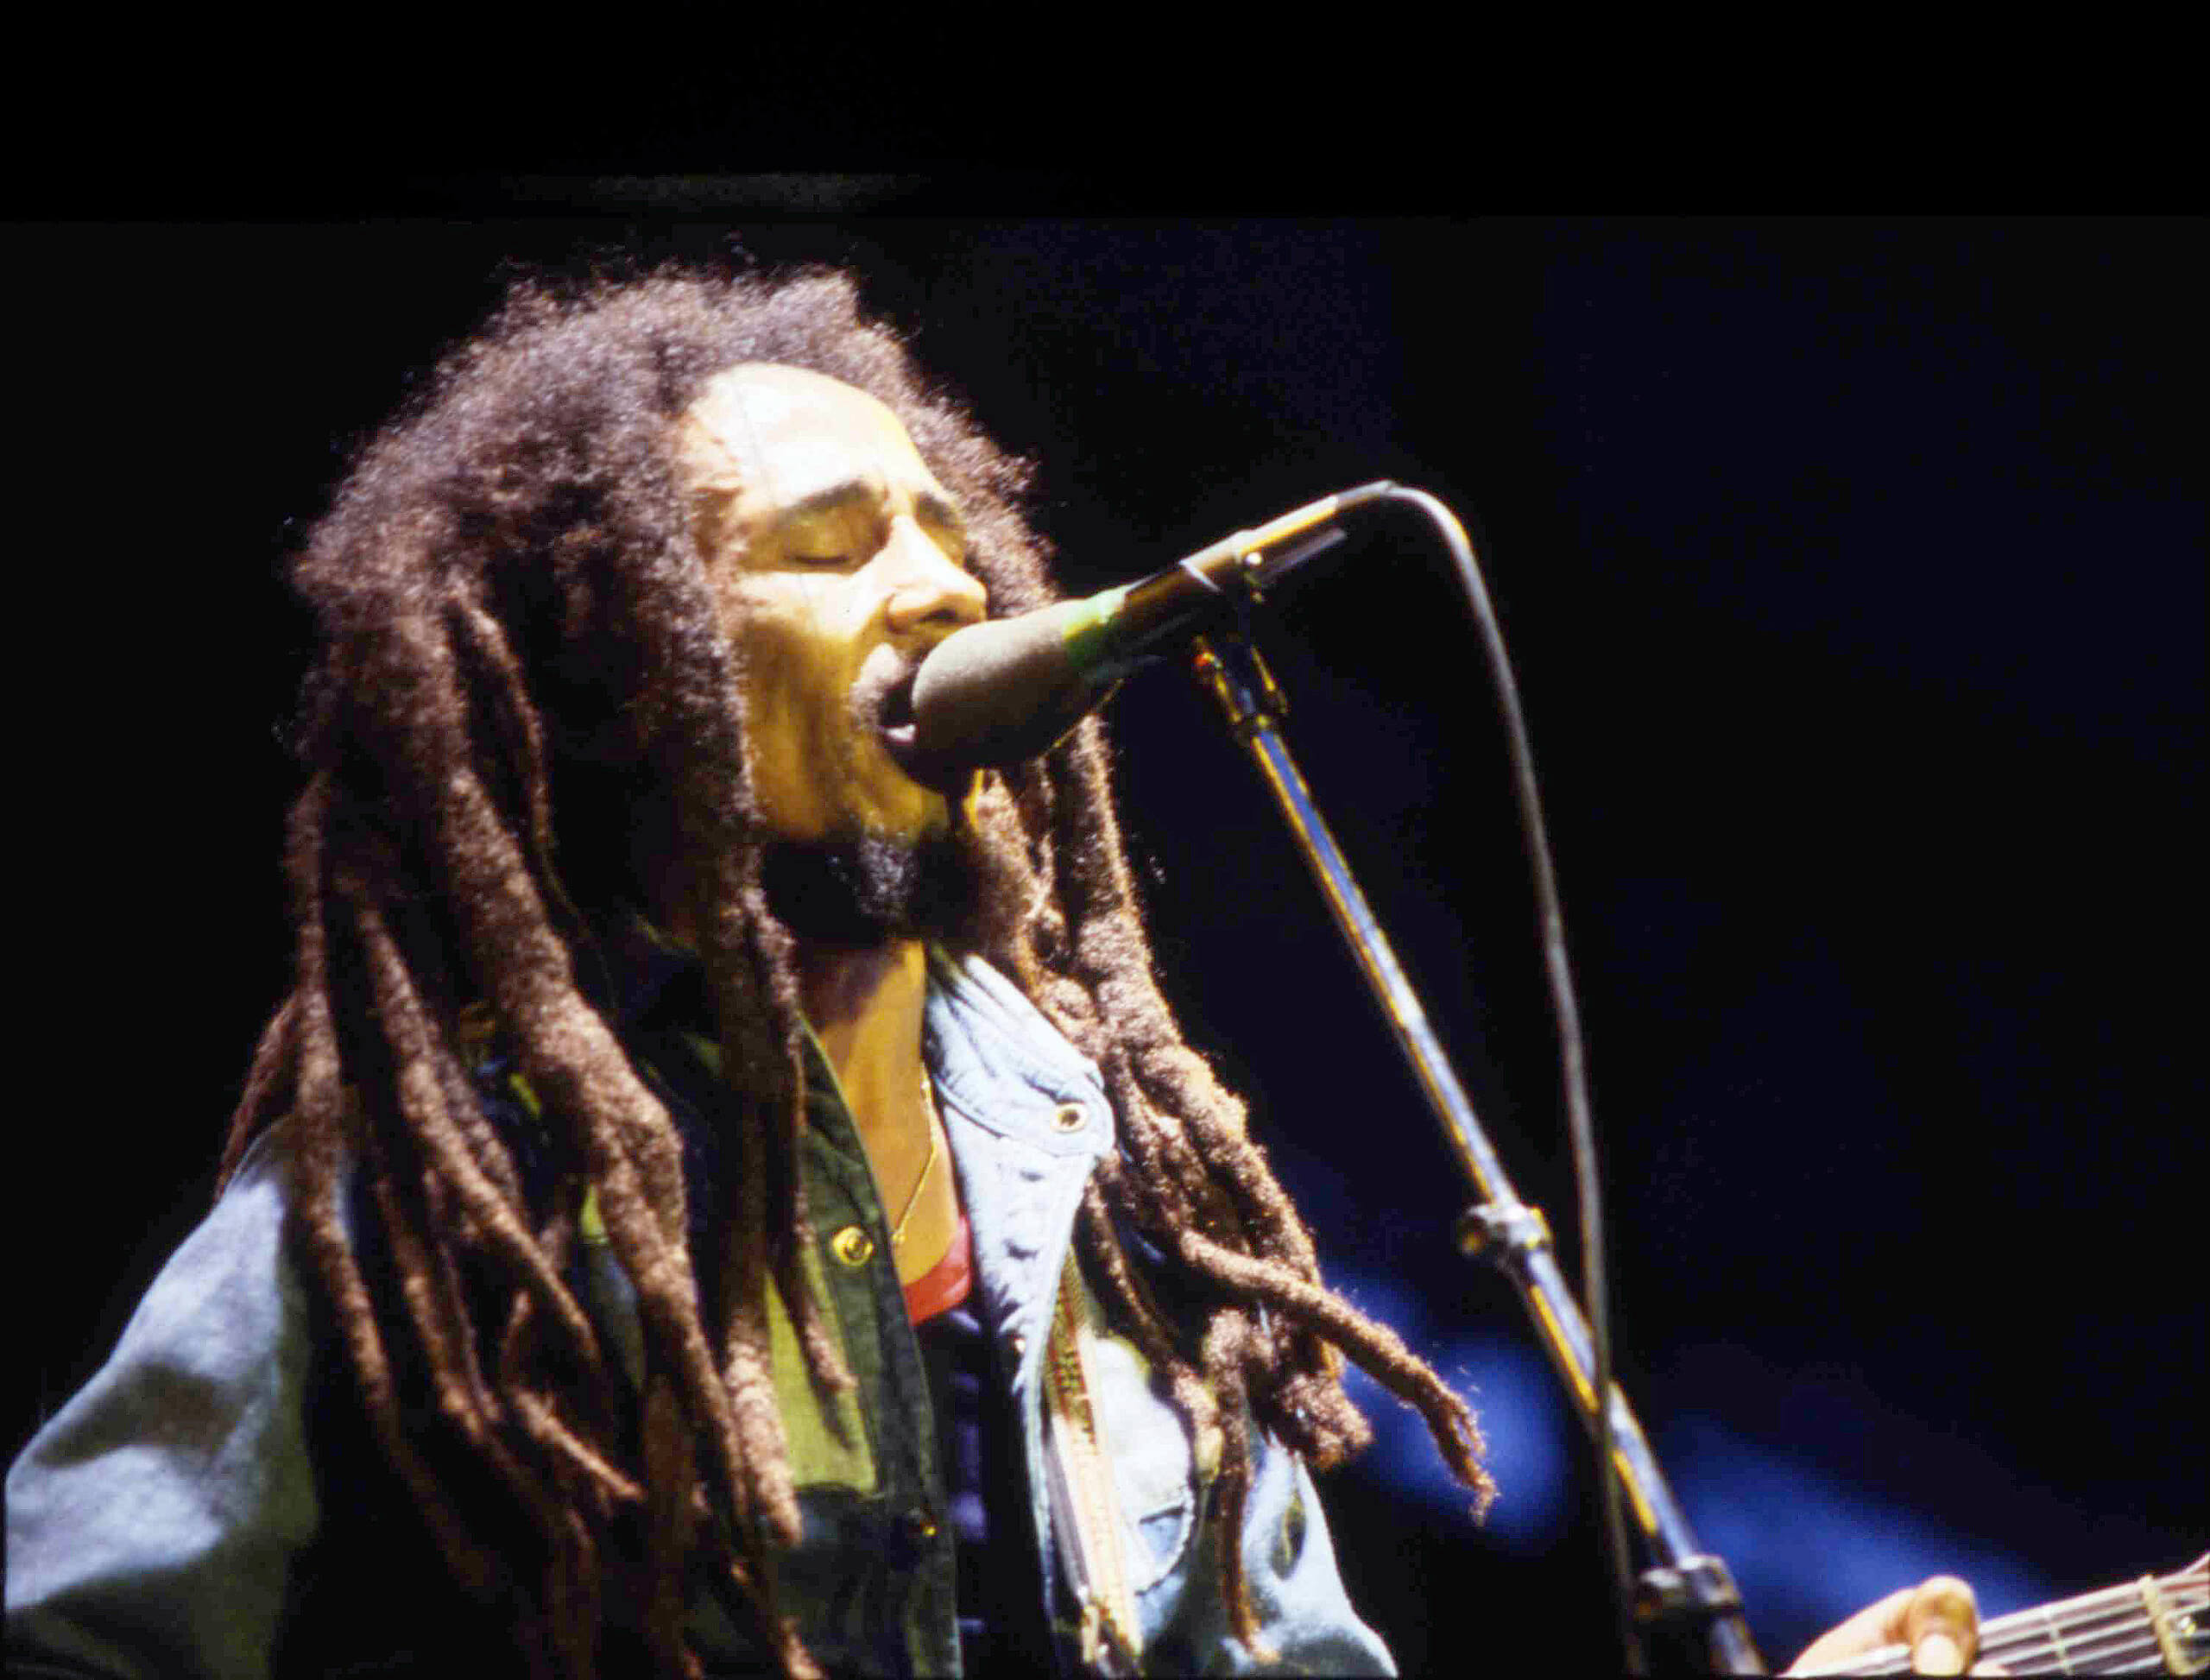 Bob Marley Fan Looking for Love in Time for Reggae Star's Biopic